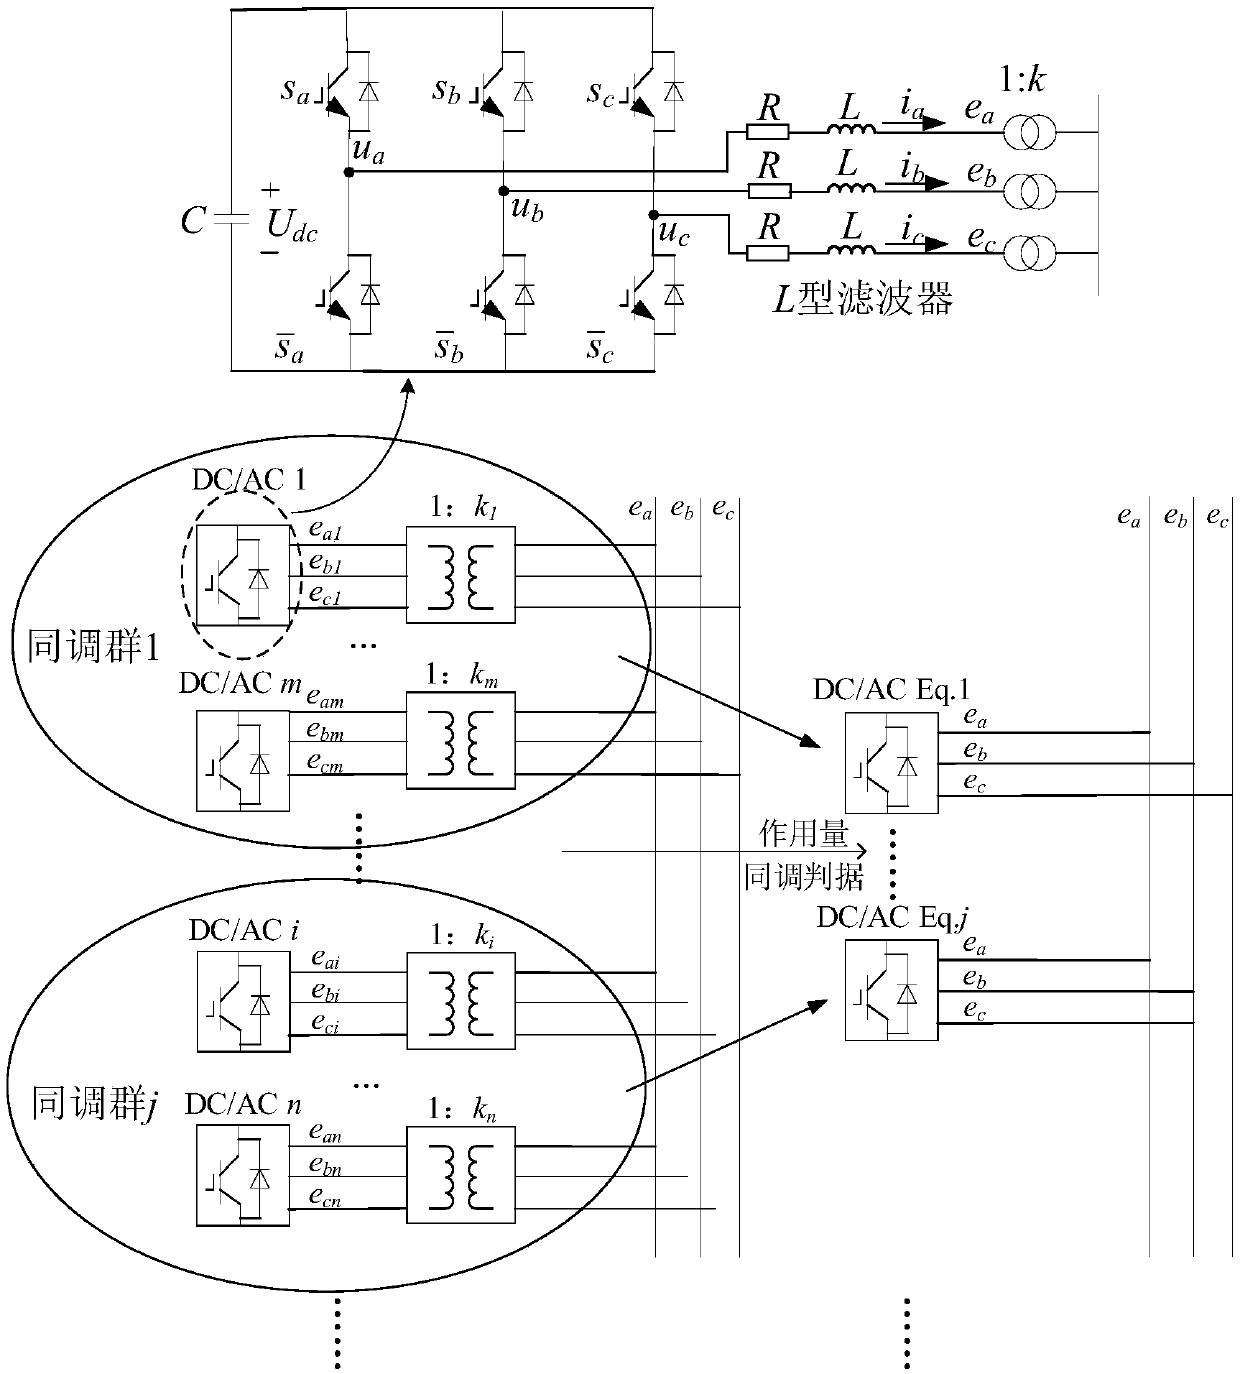 Coherent equivalent method for grid-connected inverters in new energy power generation systems based on generalized Hamiltonian action